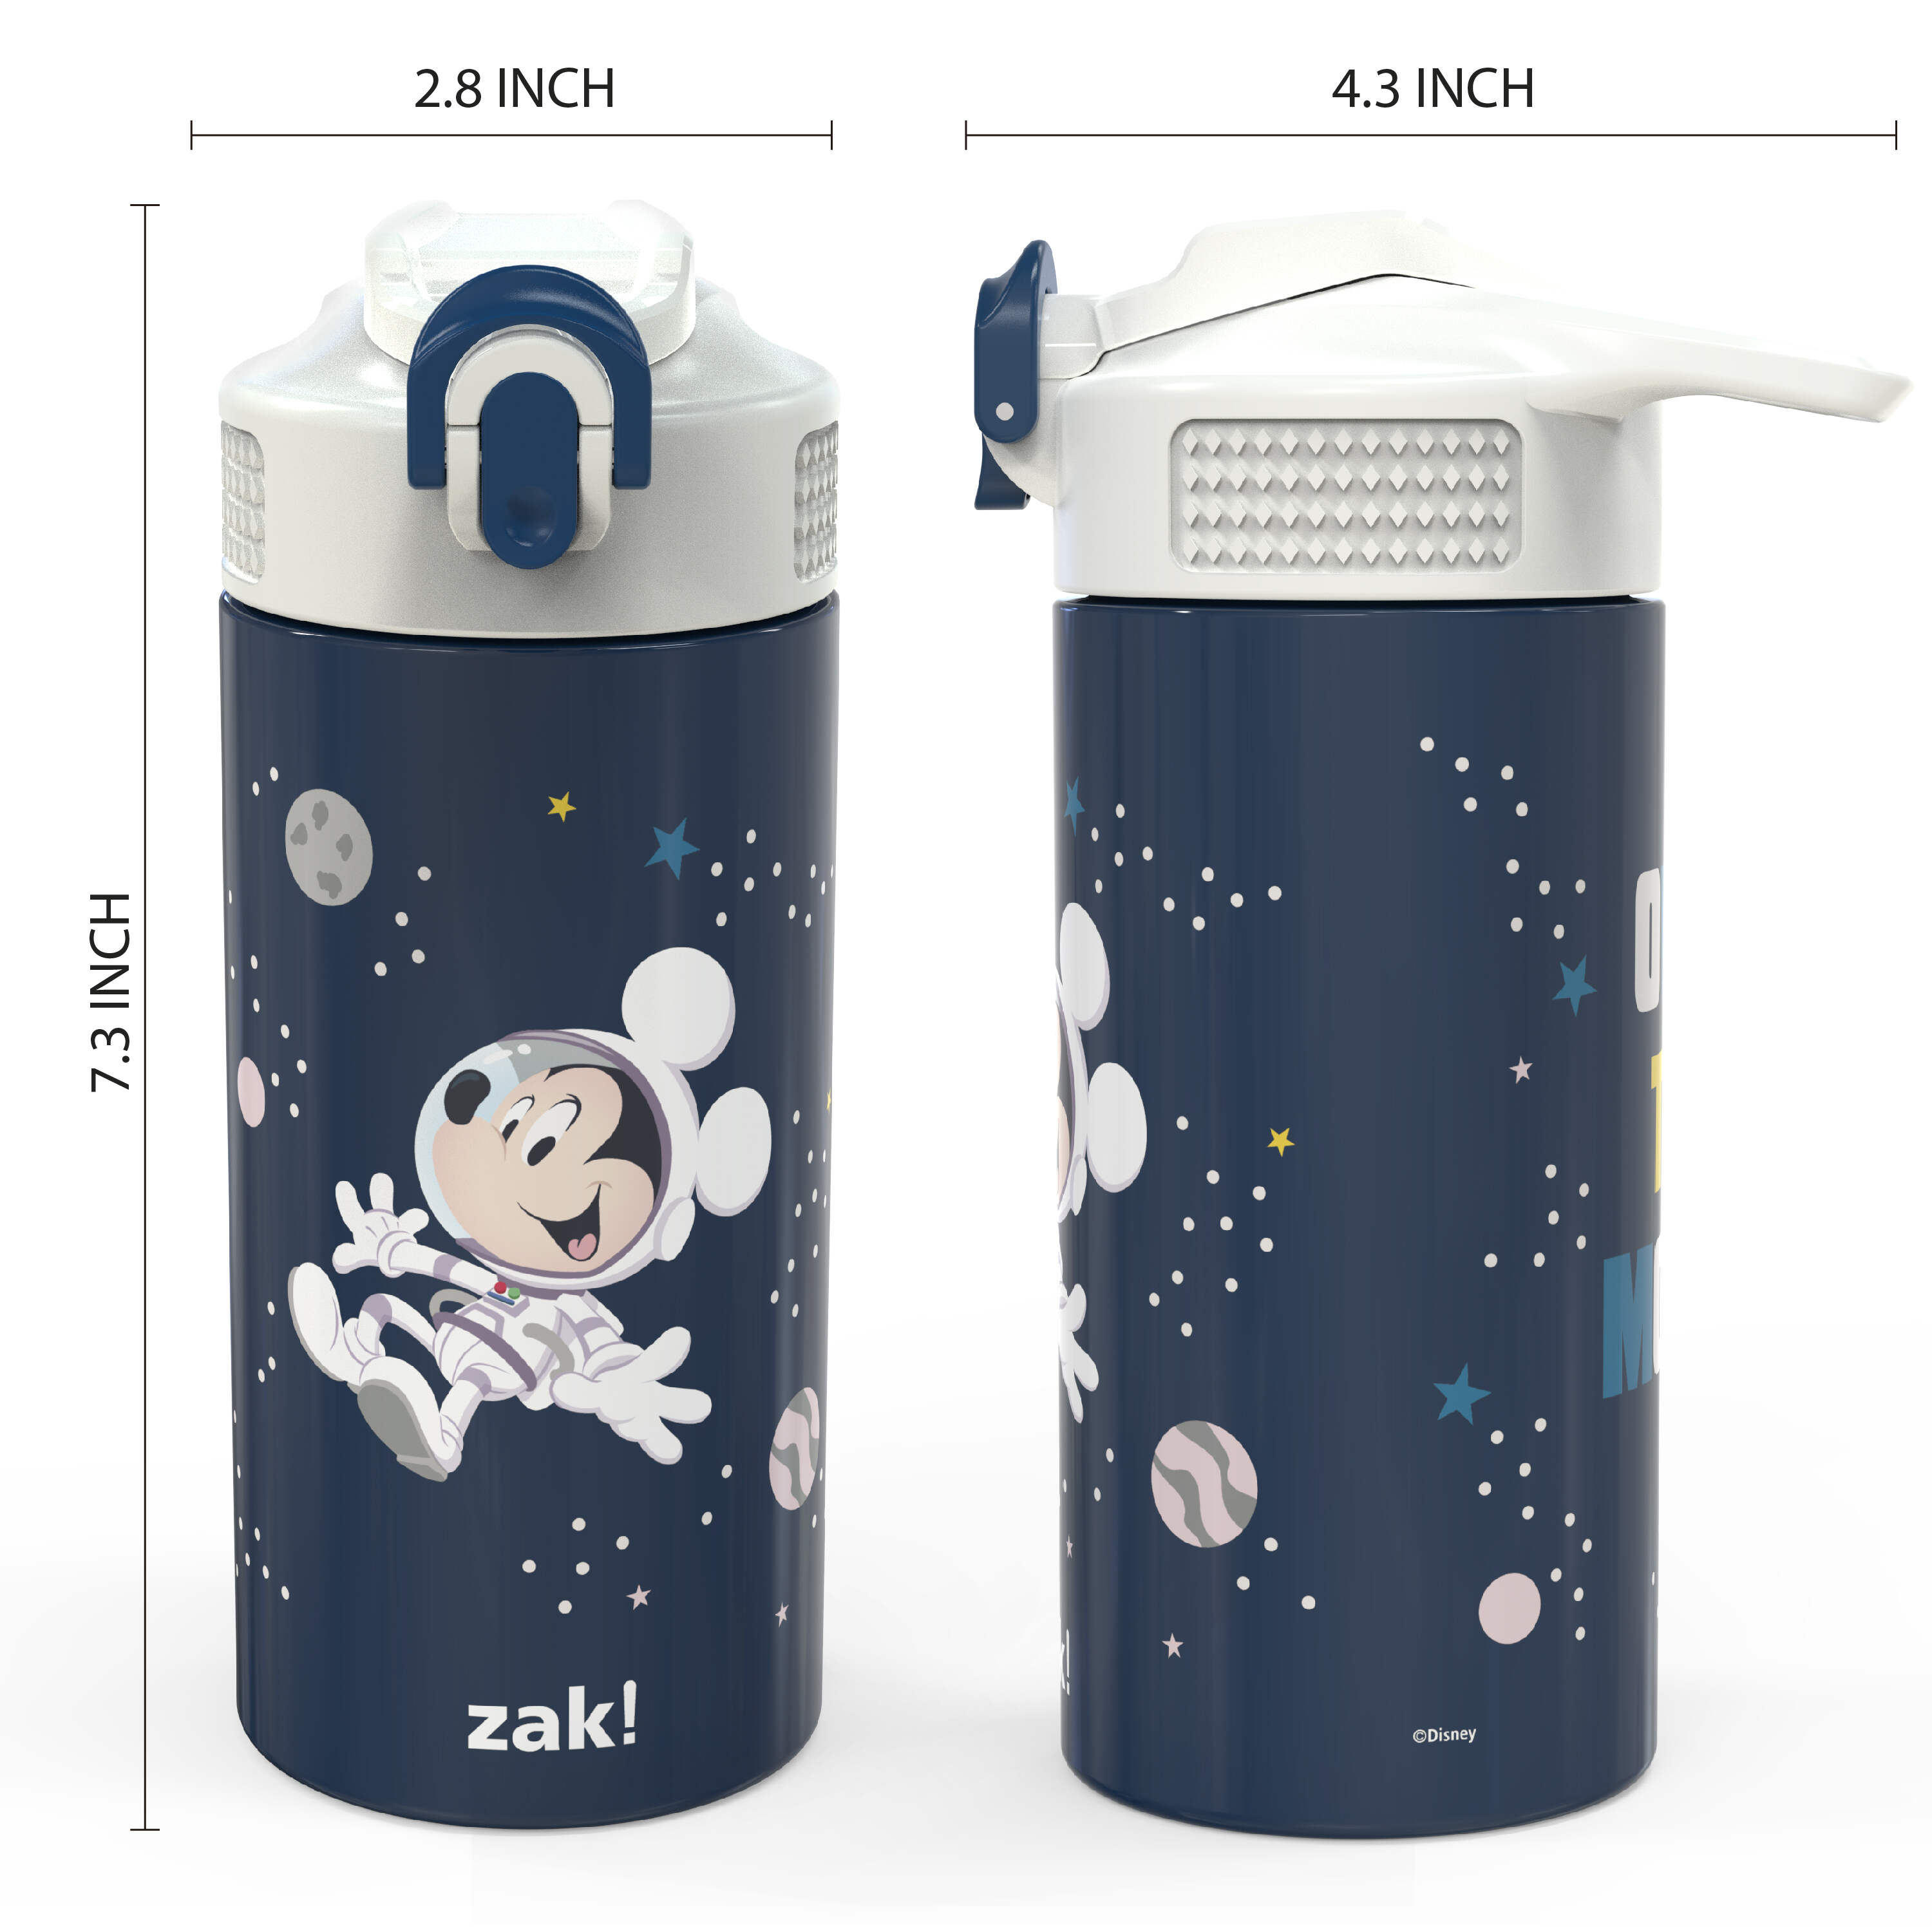 Details about   Disney Store Mickey Mouse Reusable Aluminum Water Bottle w/ Neoprene Sleeve A33 